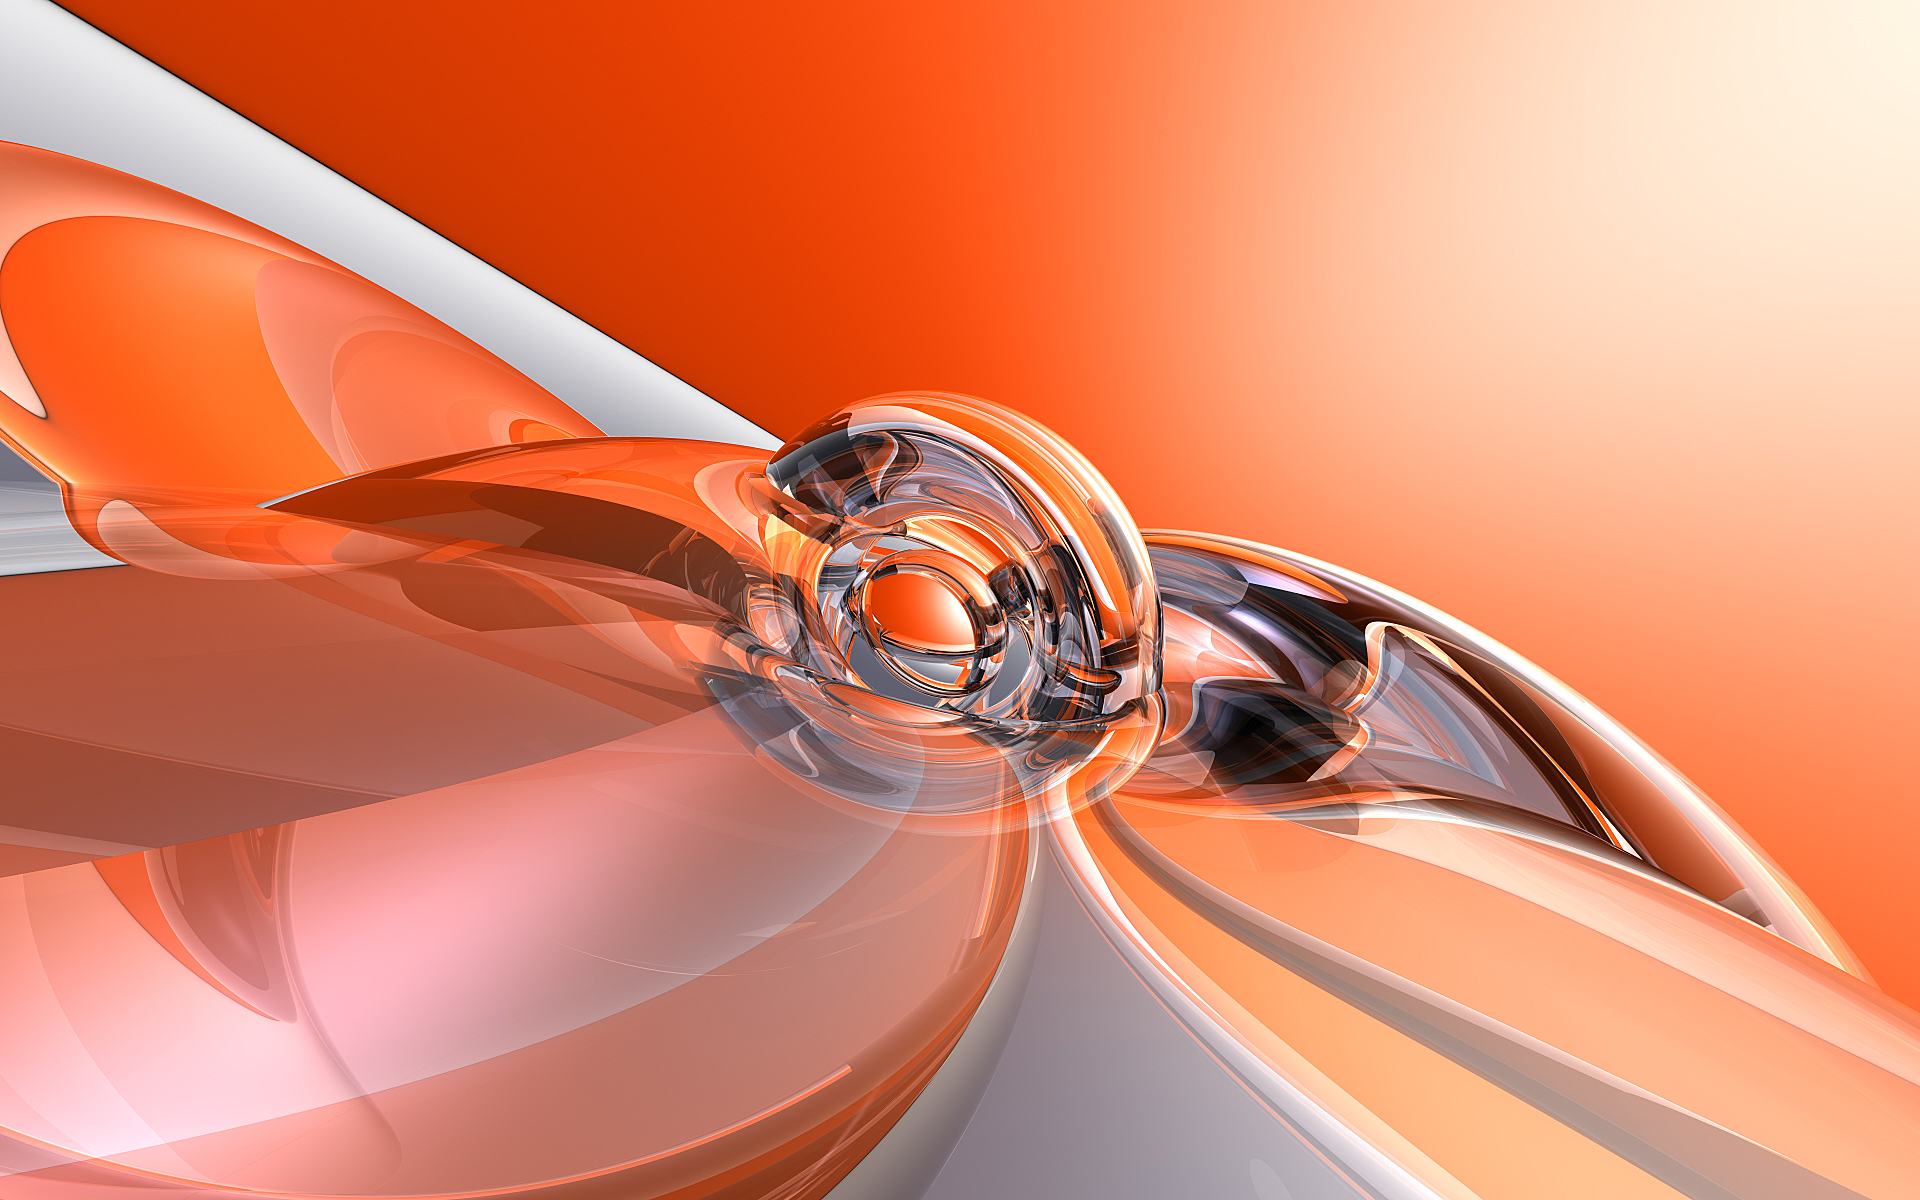 abstract 3d artwork